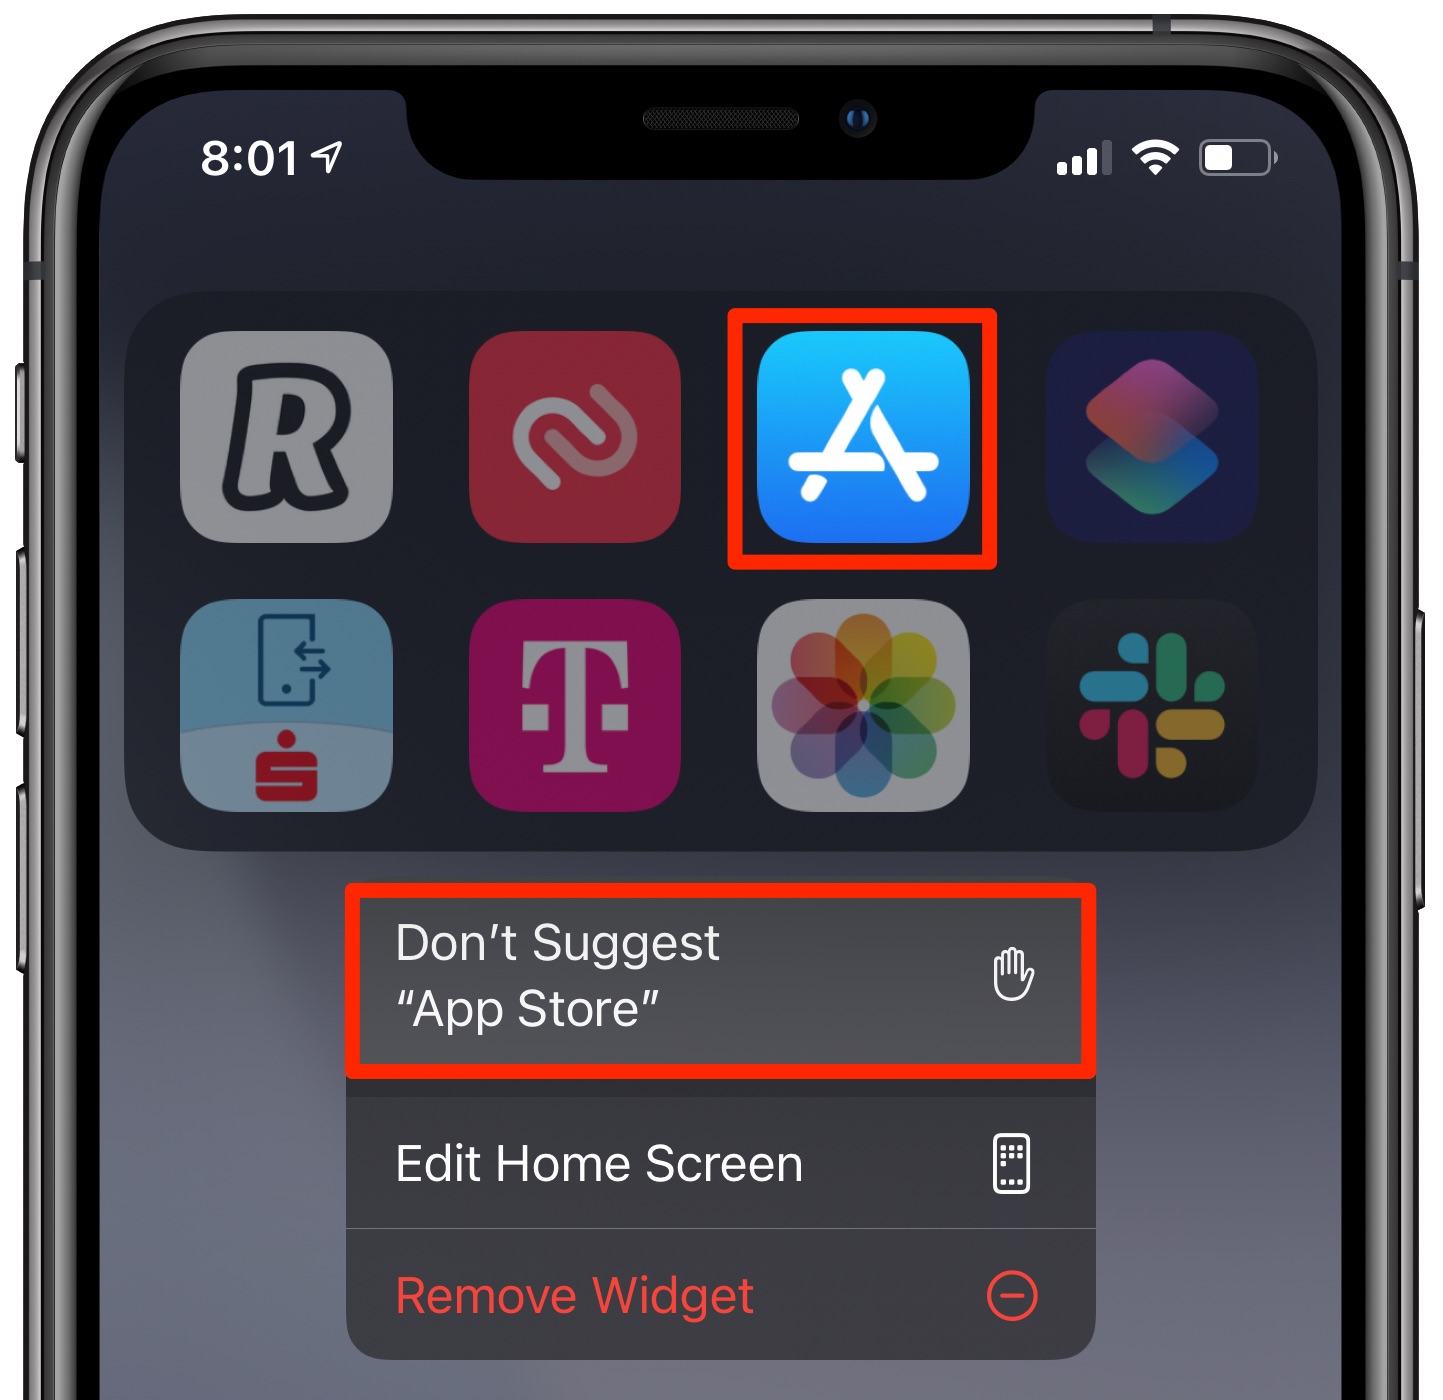 Siri Suggestions widget - telling Siri to stop suggesting App Store on the Home screen